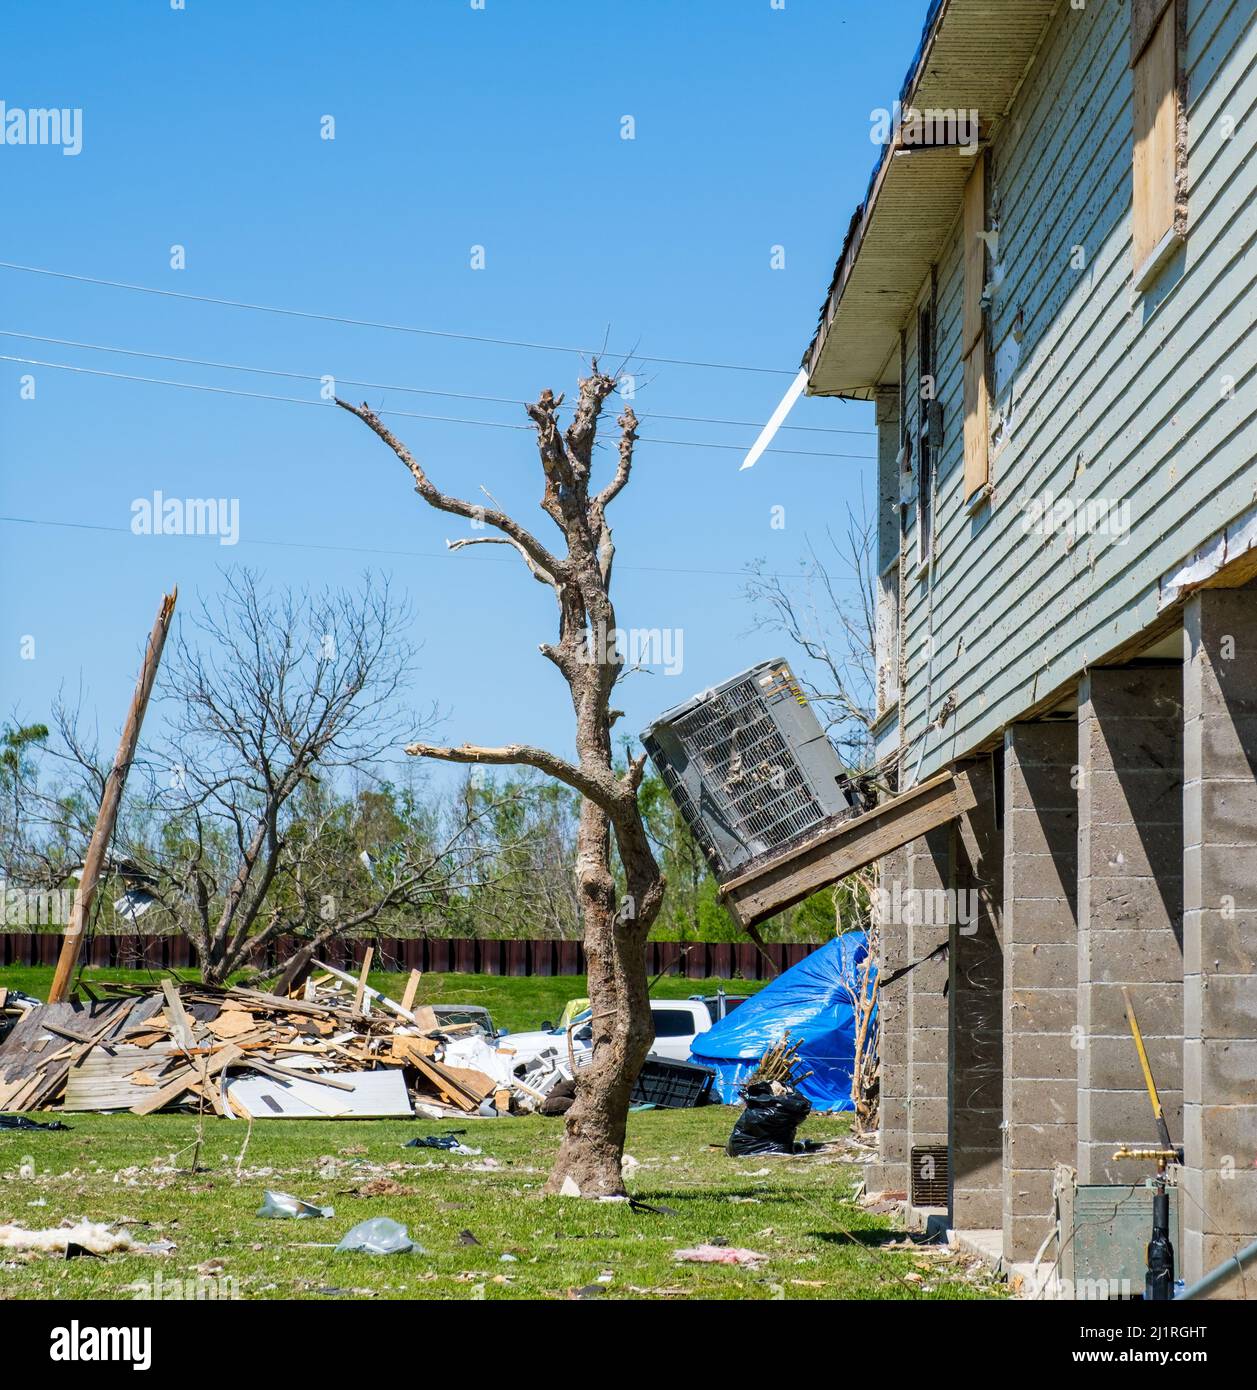 ARABI, LA, USA - MARCH 26, 2022: Severely damaged air conditioning unit on side of house and remnants of tree stripped by March 22 tornado Stock Photo